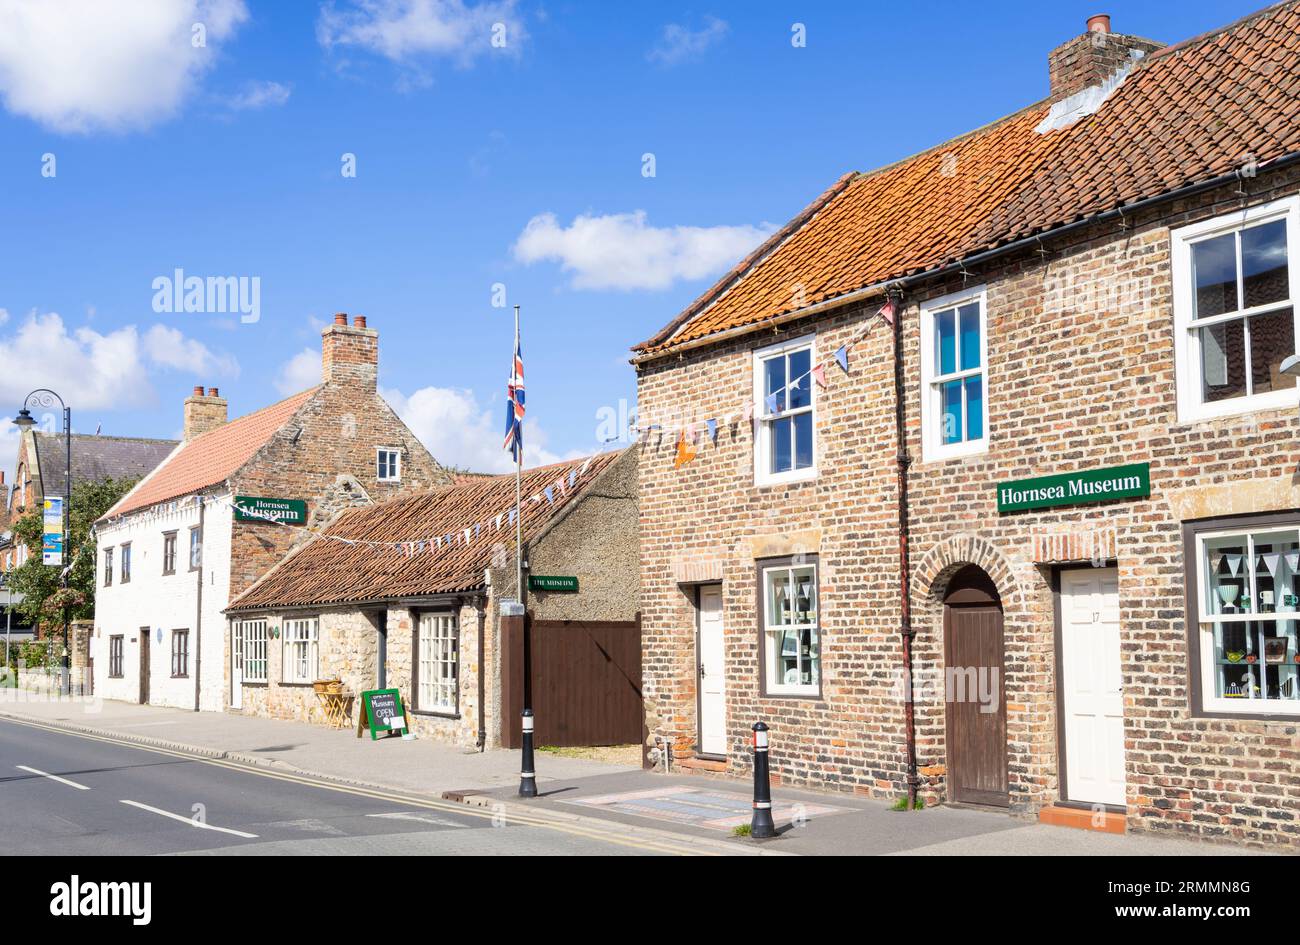 Hornsea Museum on the main street Newbegin of the town of Hornsea East Riding of Yorkshire England UK GB Europe Stock Photo